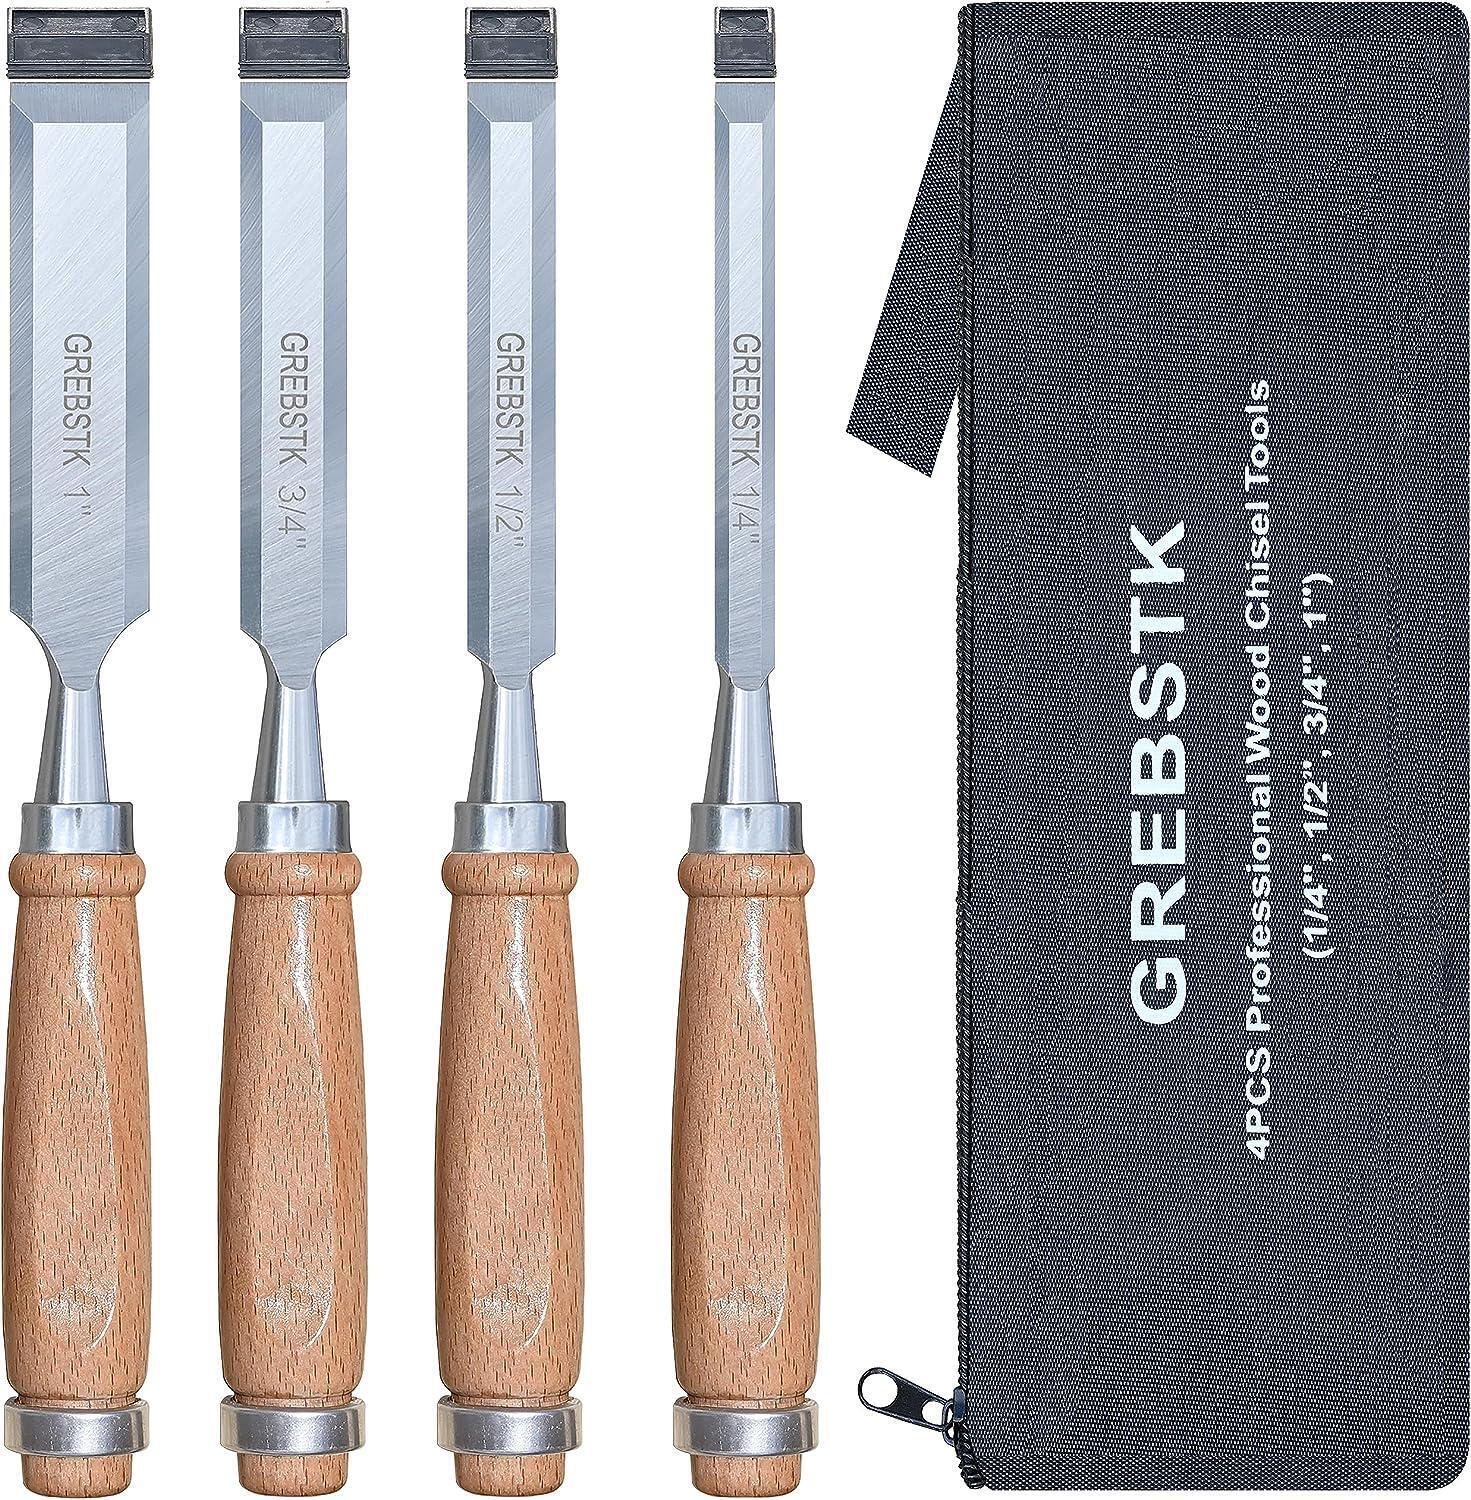 GREBSTK 4 Piece Professional Wood Chisel Set with Oxford Bag Woodworking, CR-V